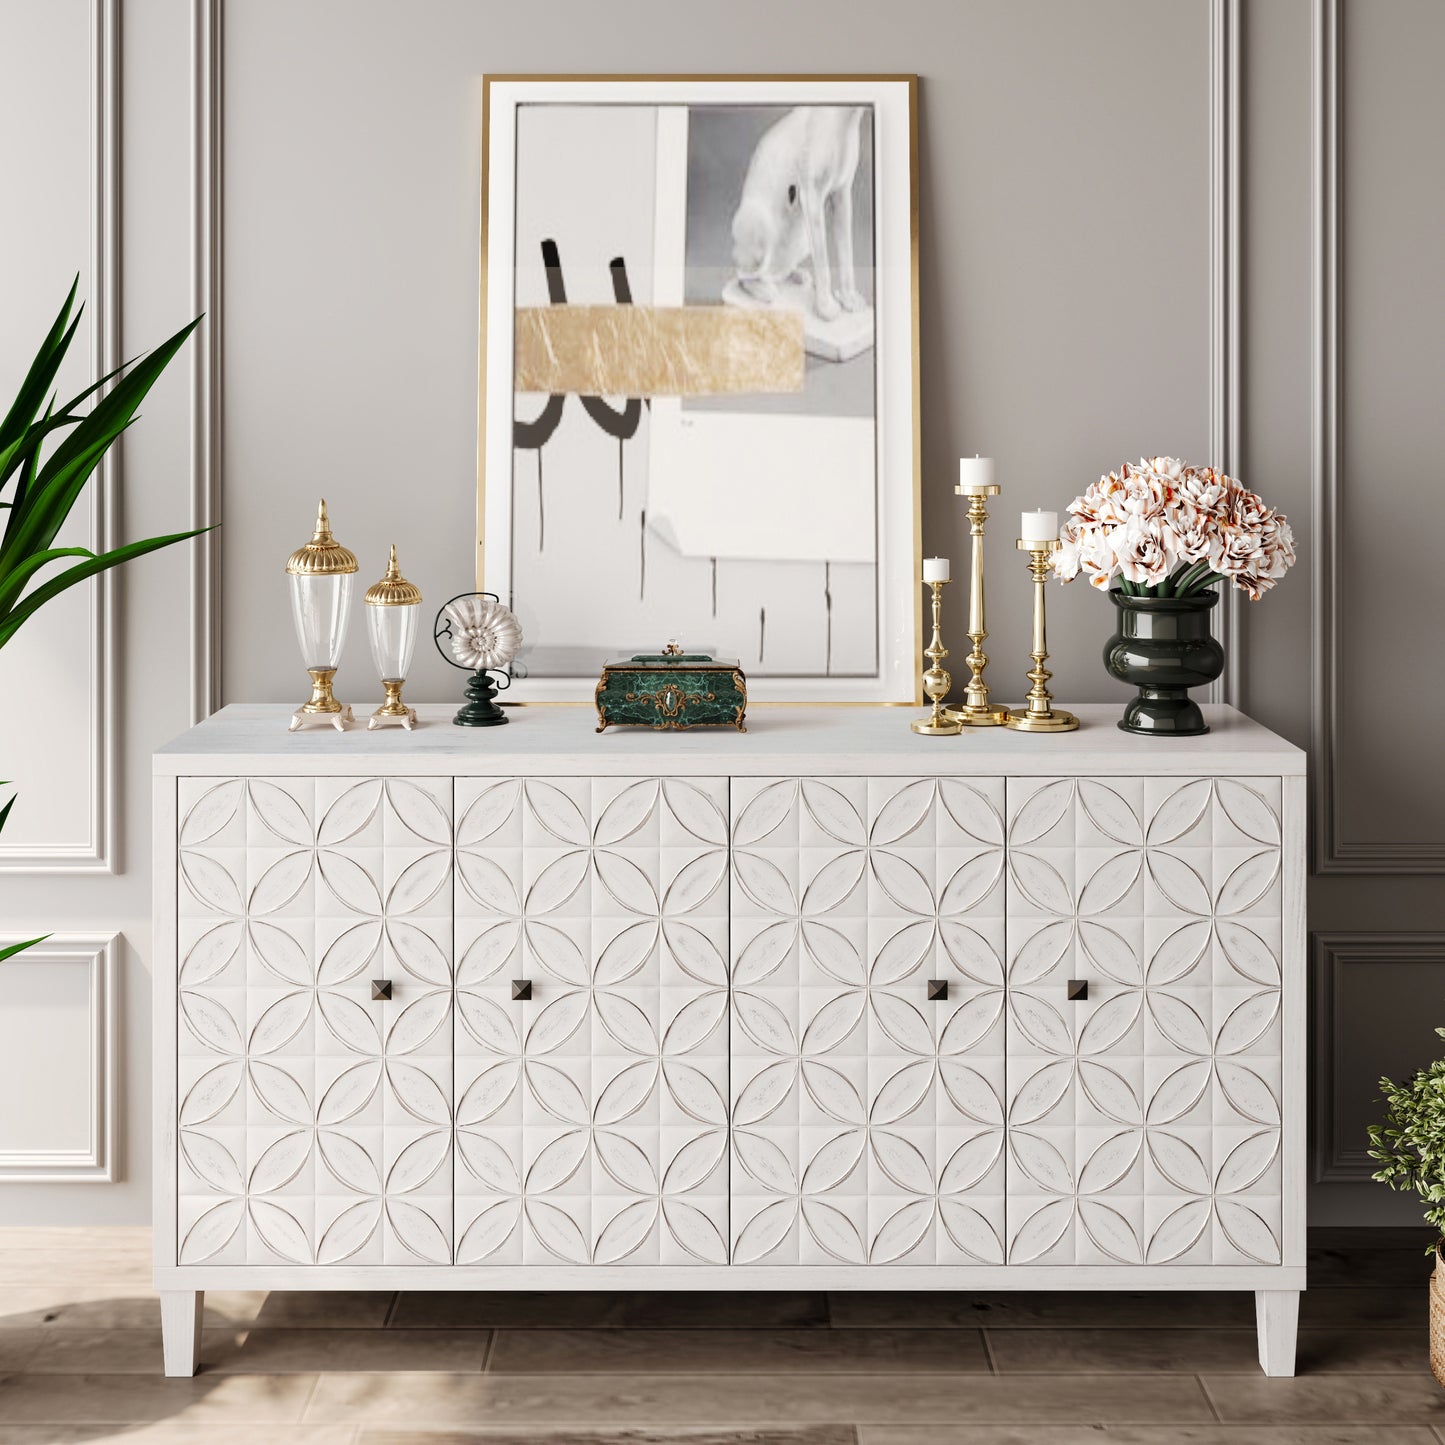 Elegant Essence: The White-Washed Serenity Cabinet. Designed to blend seamlessly in any room, this four-door wooden accent piece offering ample storage. Ideal for harmonizing with various interiors, it serves both a functional and decorative purpose